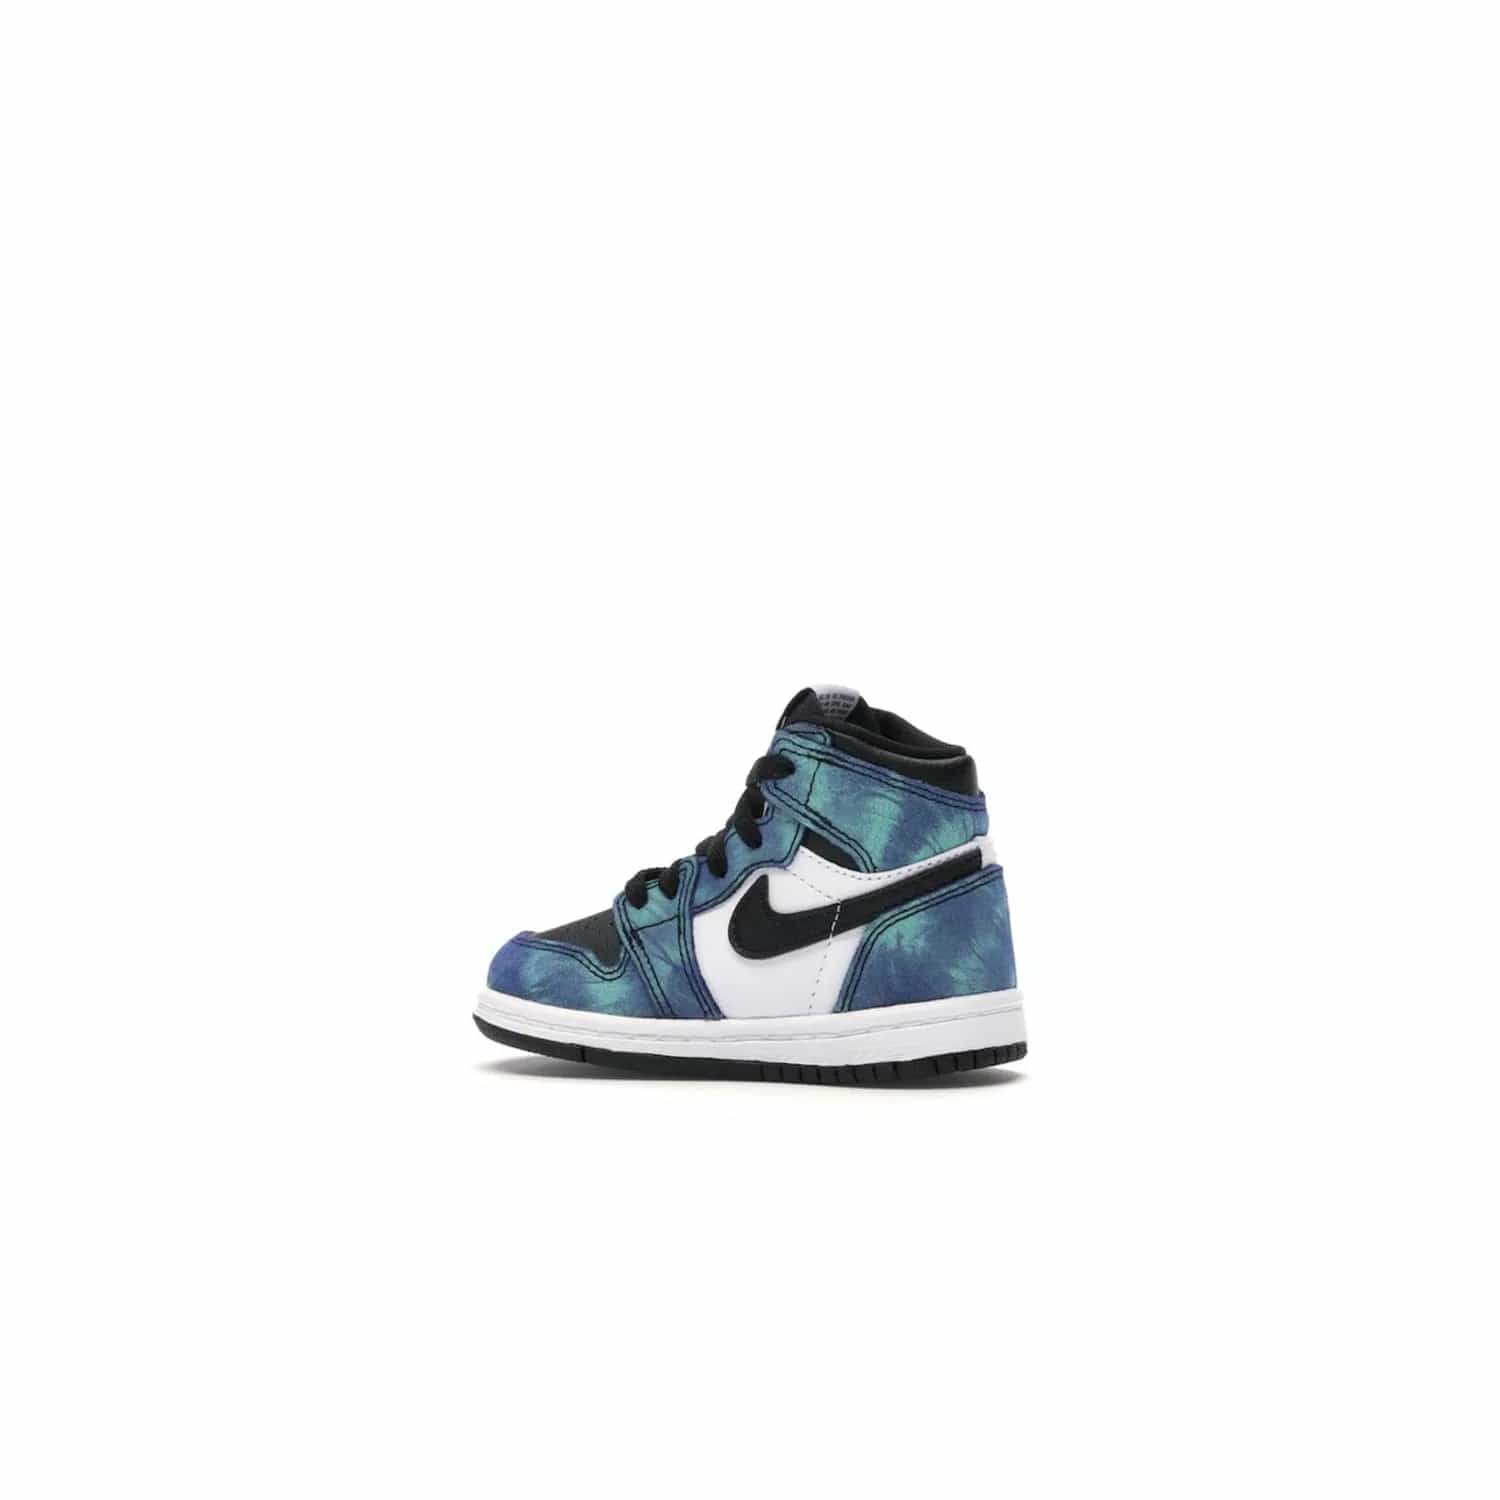 Jordan 1 Retro High Tie Dye (TD) - Image 21 - Only at www.BallersClubKickz.com - Add a unique twist to your sneaker collection with the Jordan 1 Retro High Tie Dye (TD). Classic Air Jordan 1 details like toe box perforations and the signature Swoosh logo on the sidewall are topped with an eye-catching tie dye design that’s perfect for styling all year round.